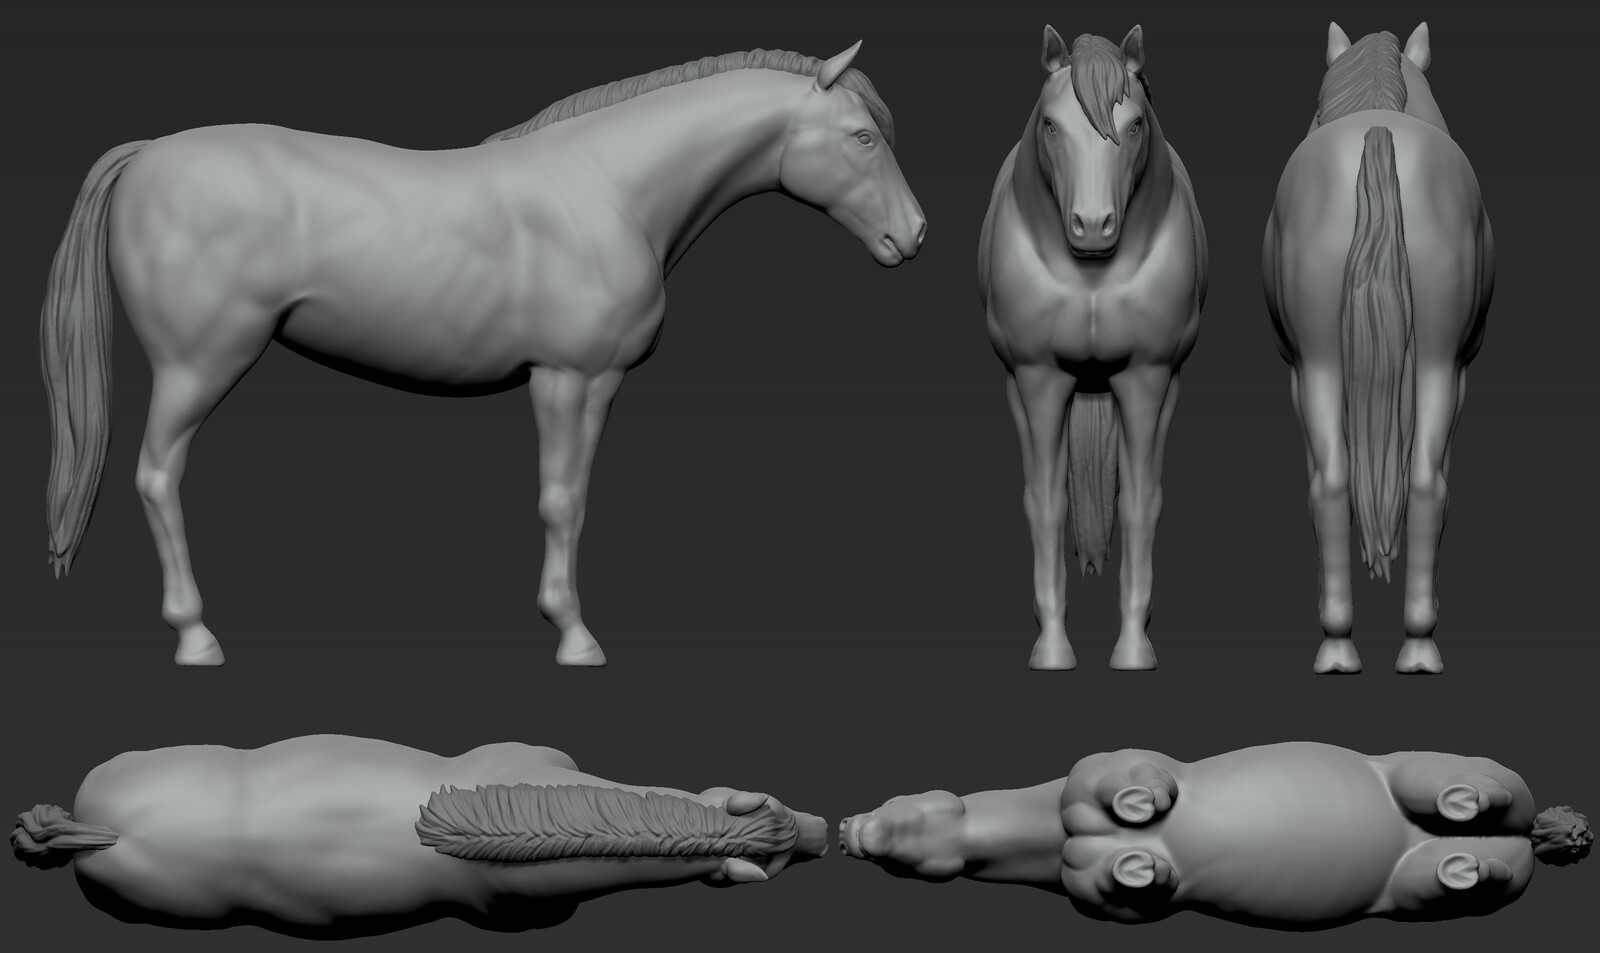 4.5-hour horse study made prior to this project